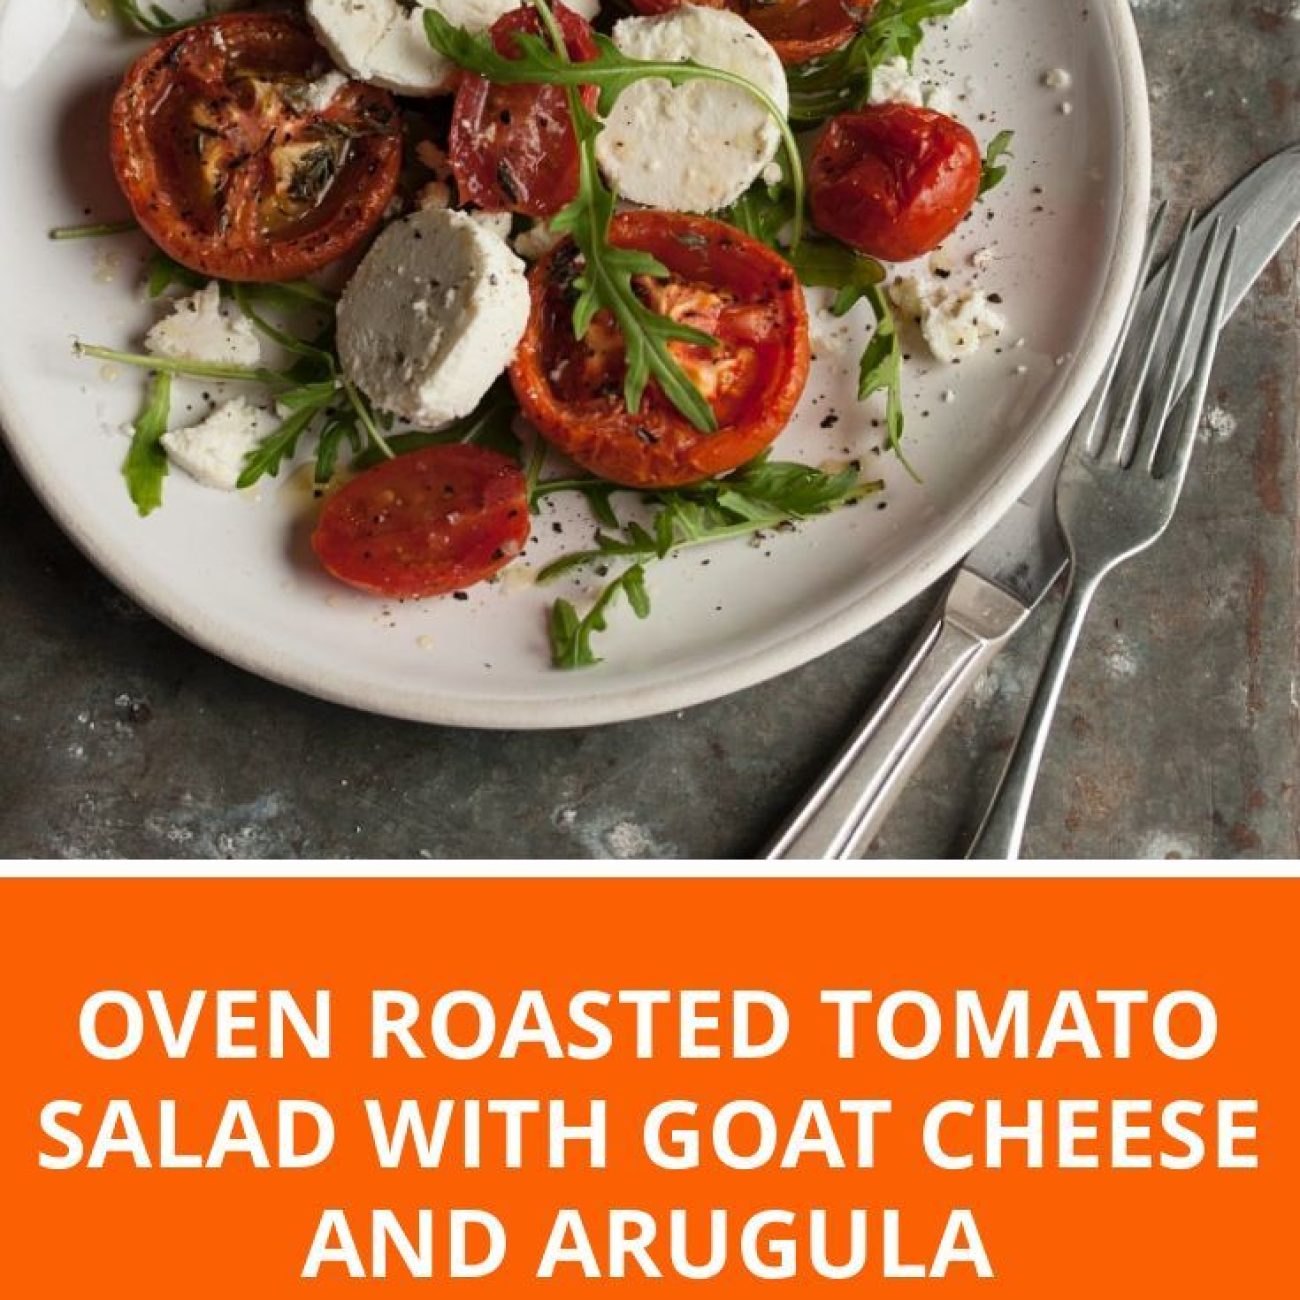 Oven-Roasted Tomatoes With Goat Cheese And